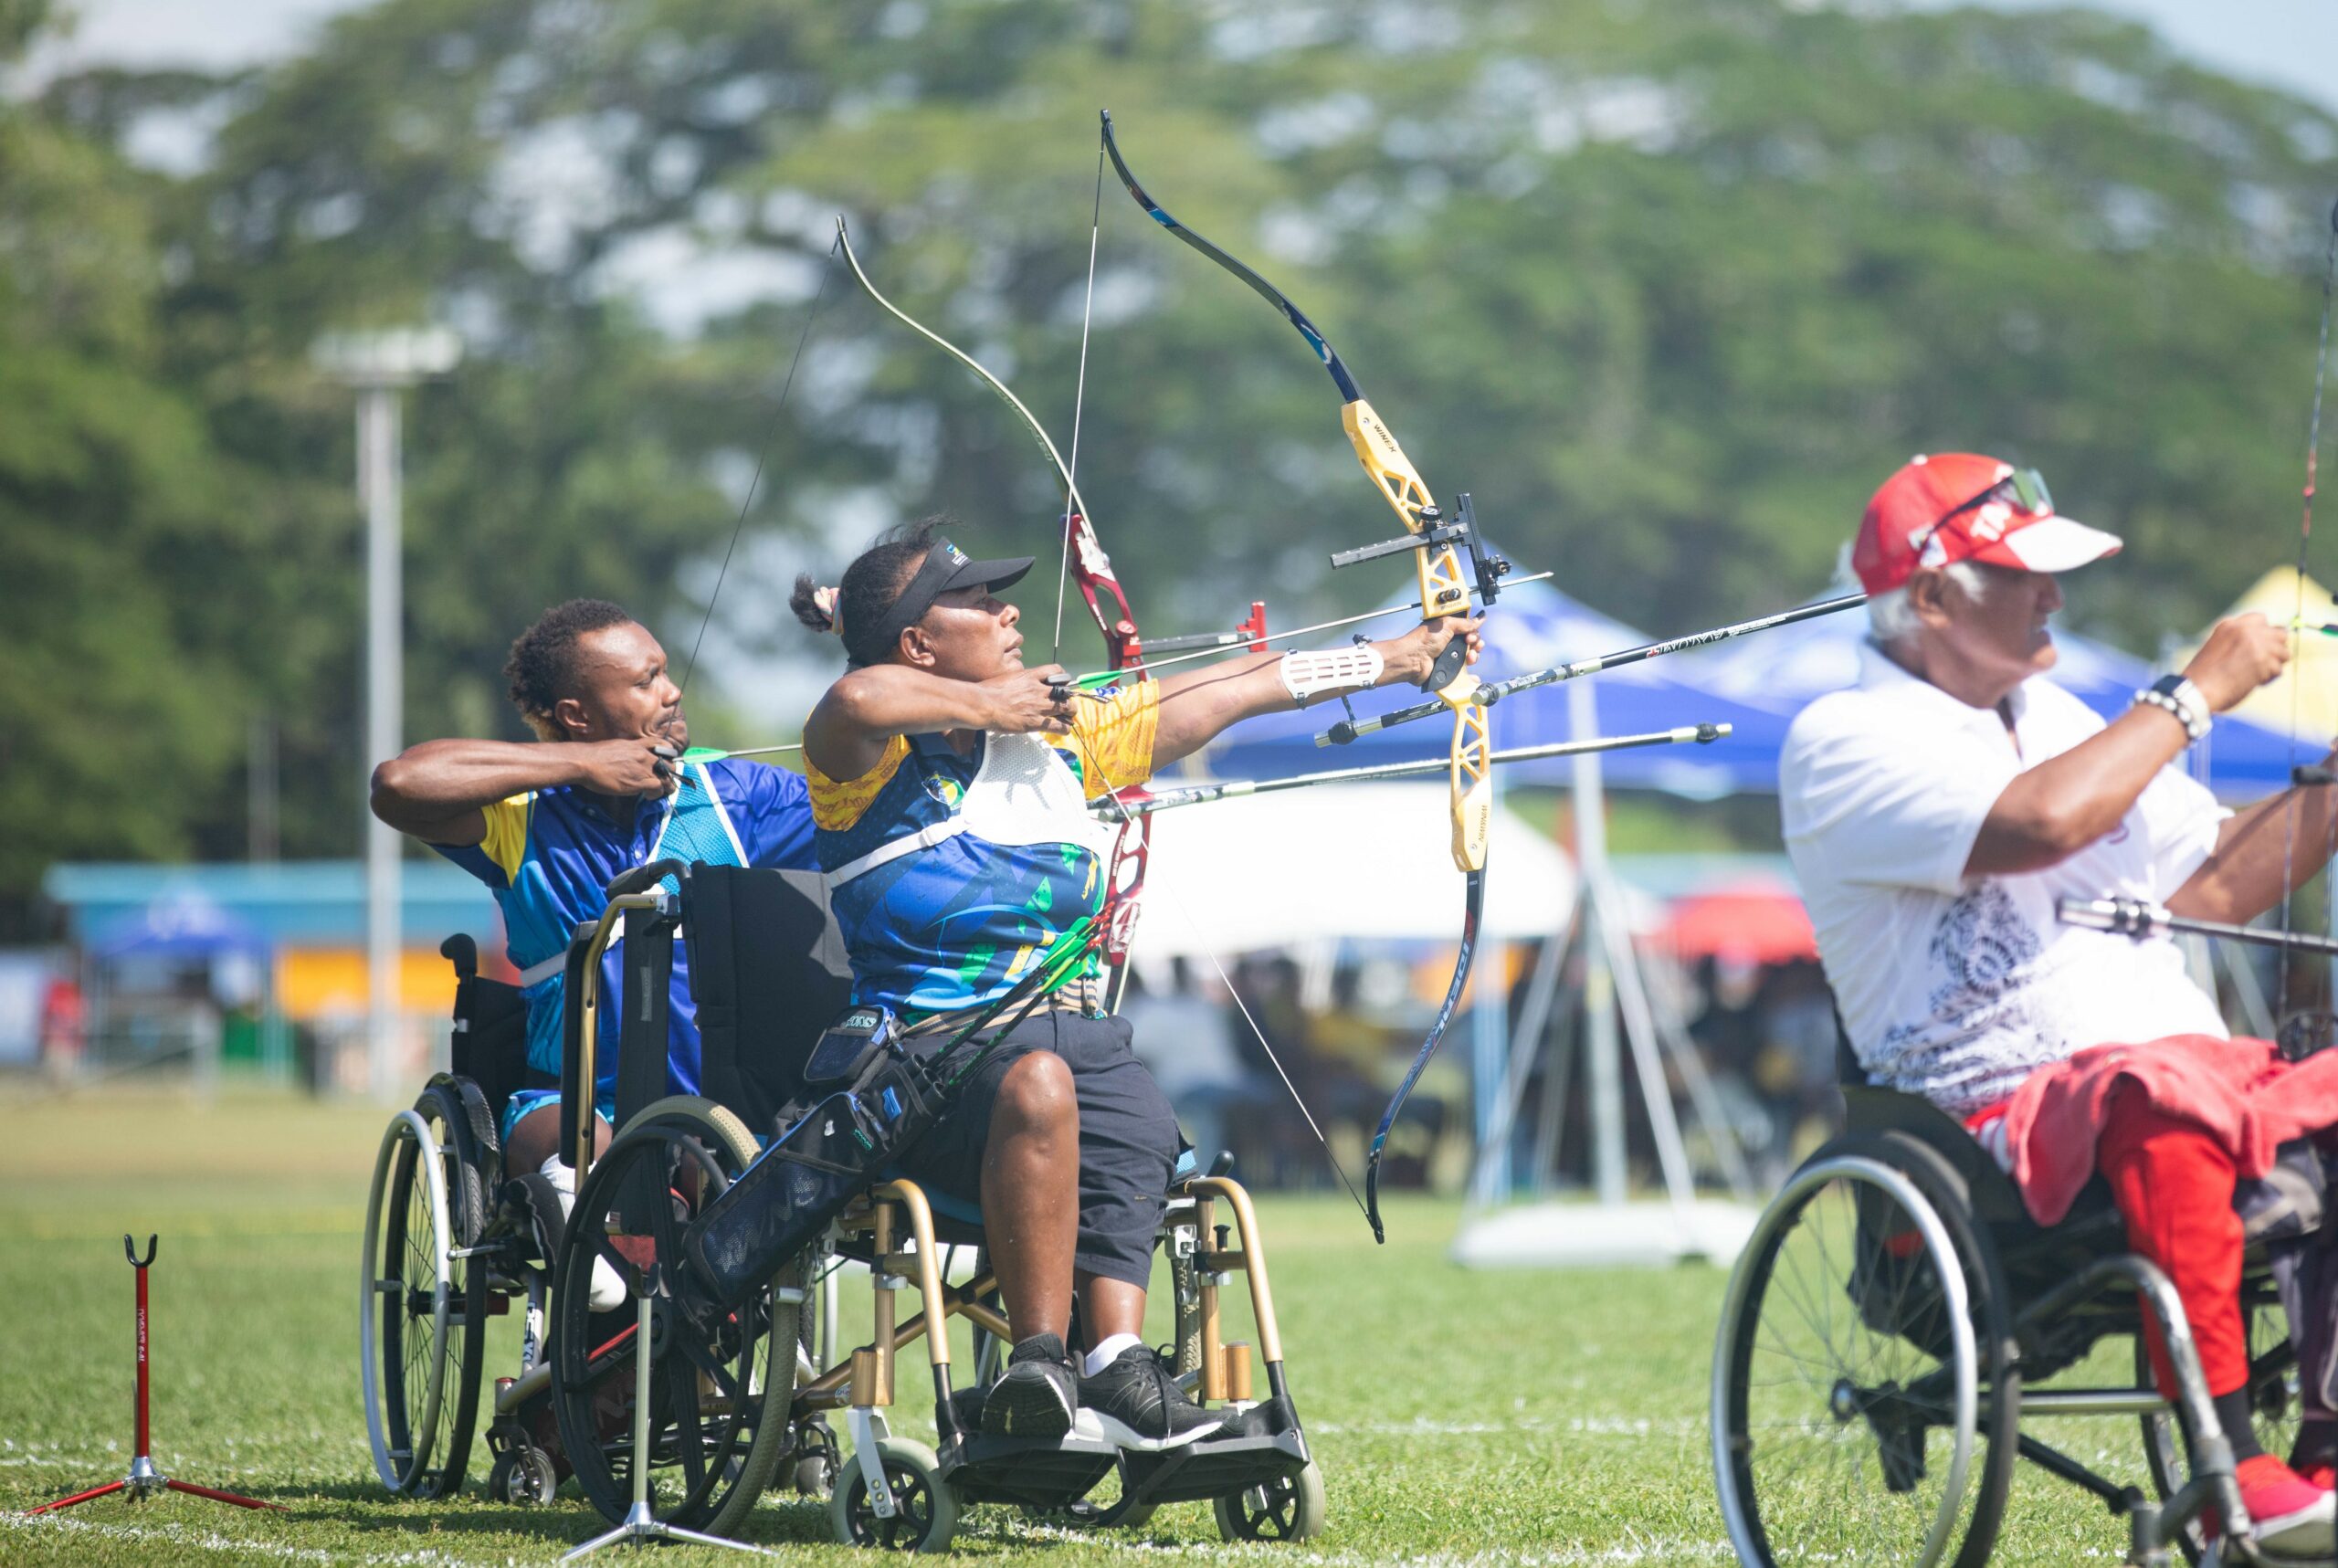 People in wheelchairs competing in archery